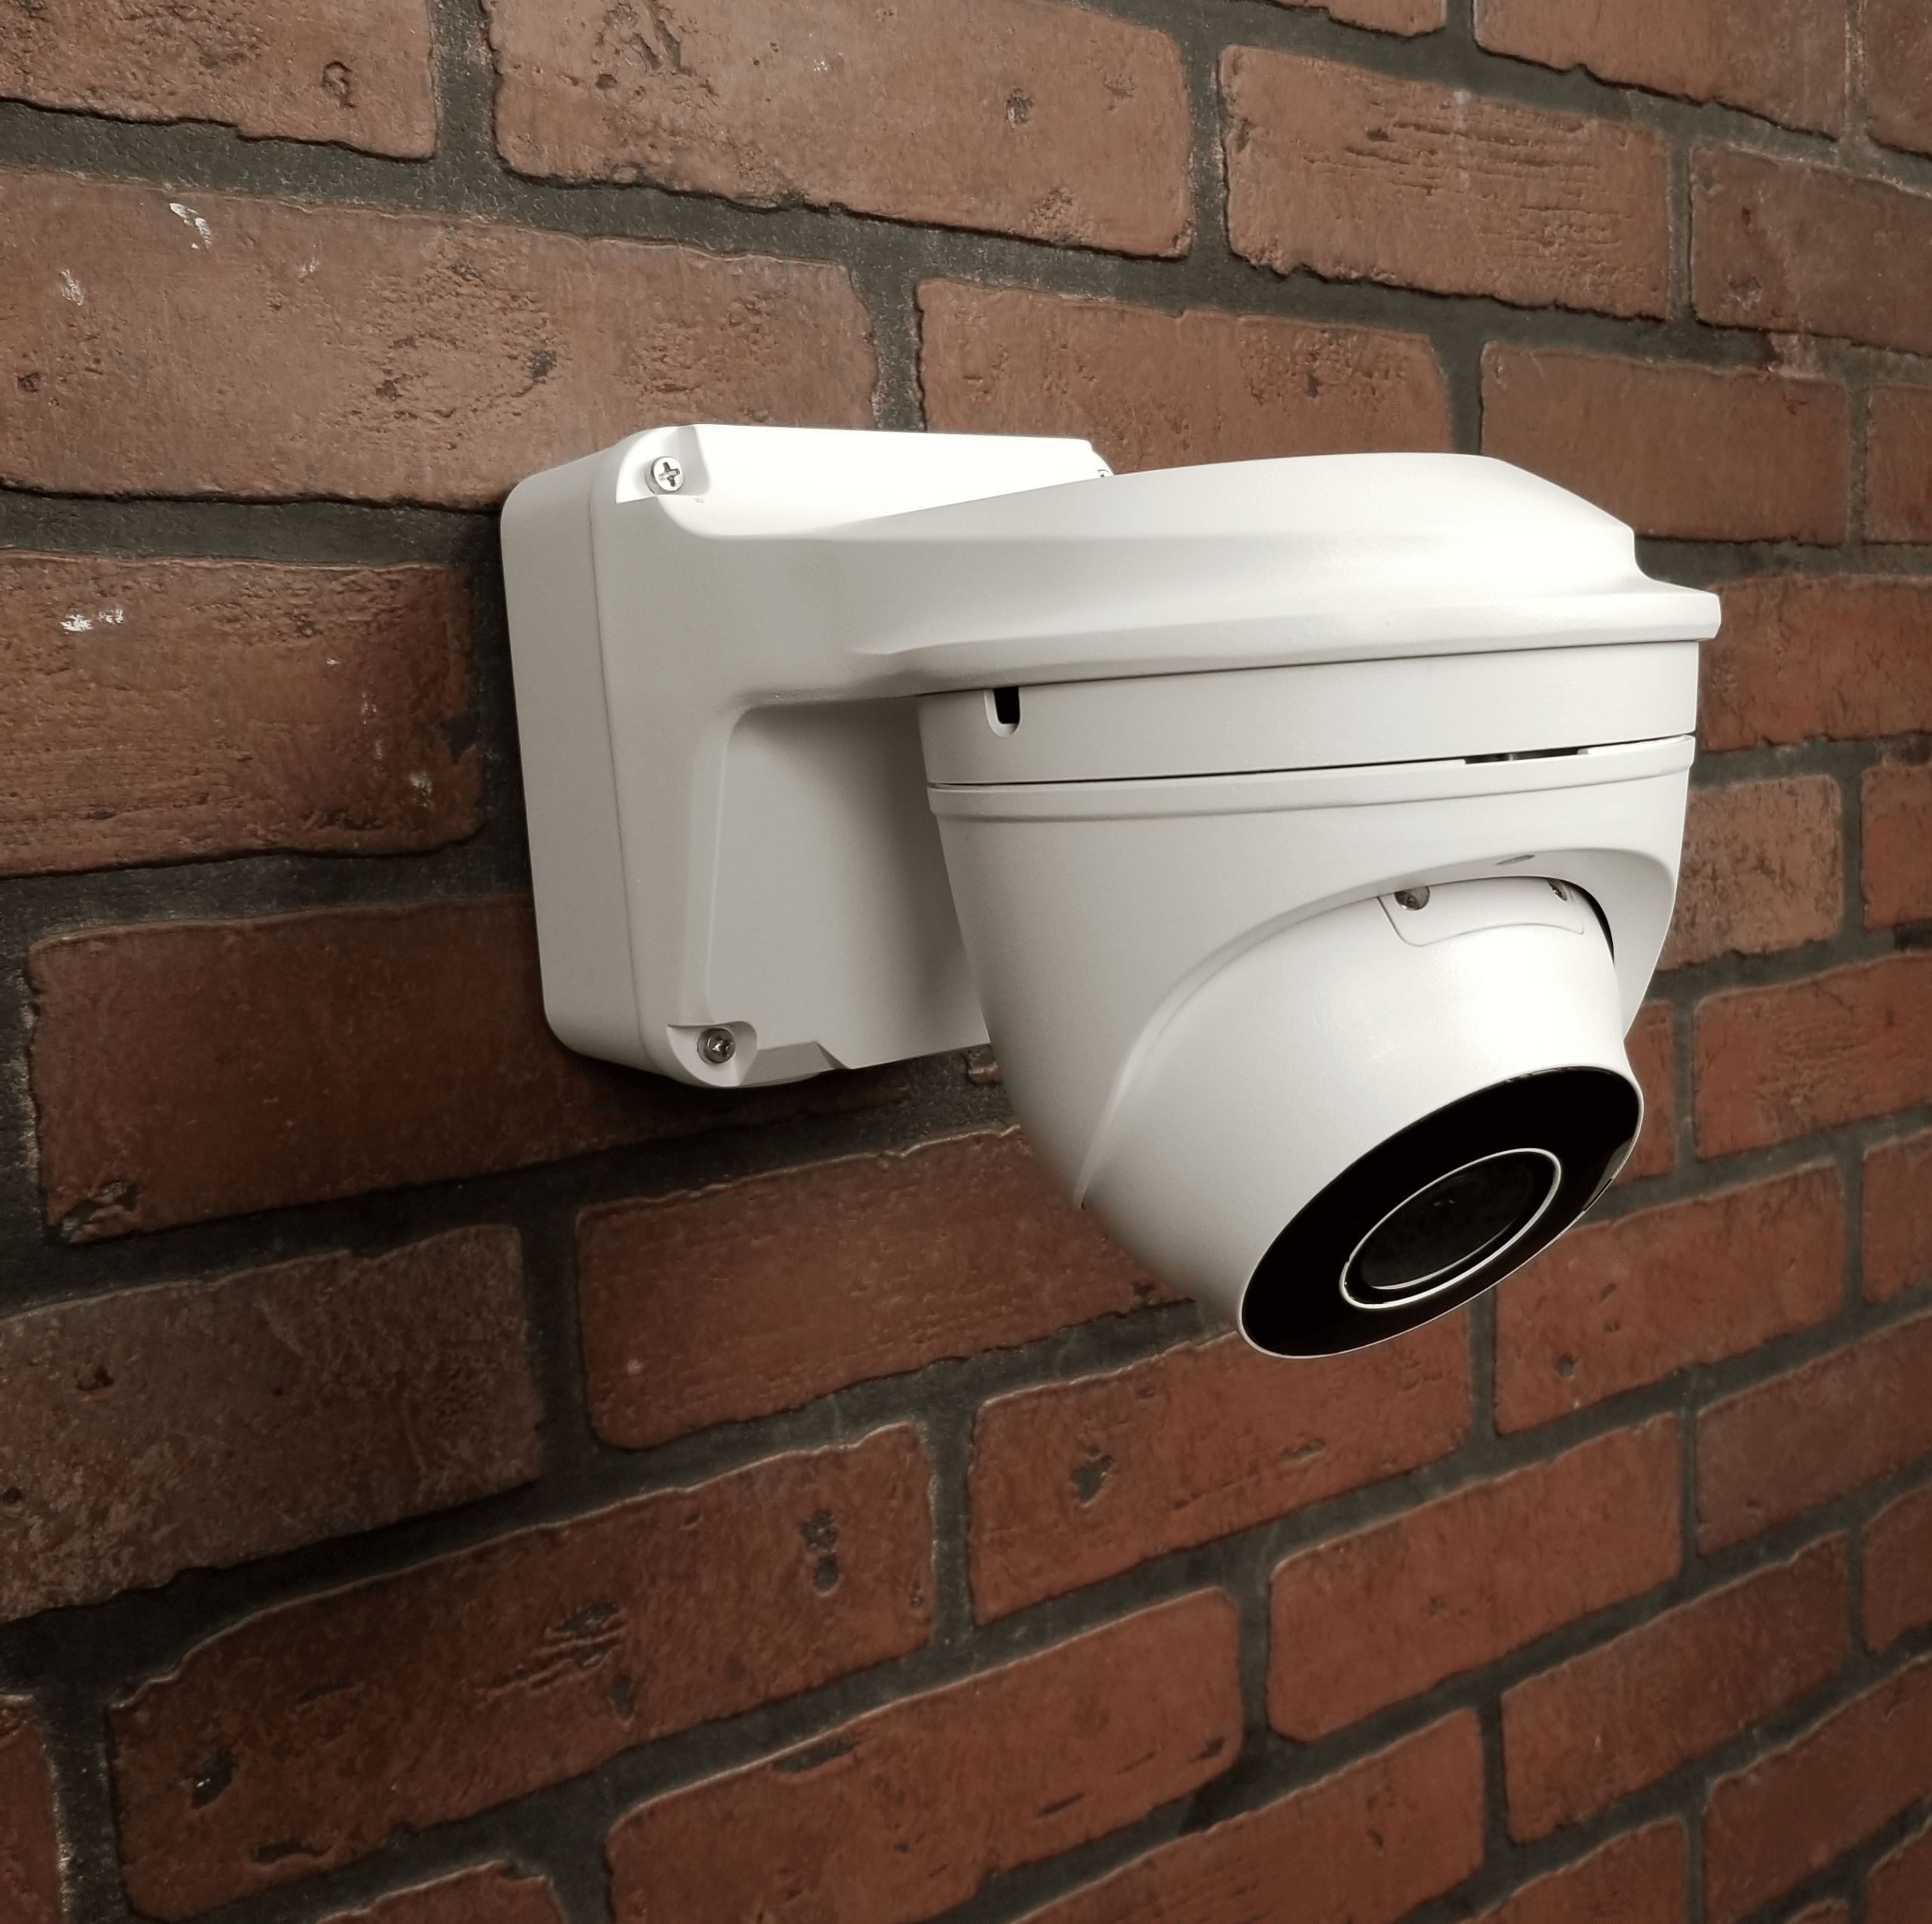 dome camera on wall